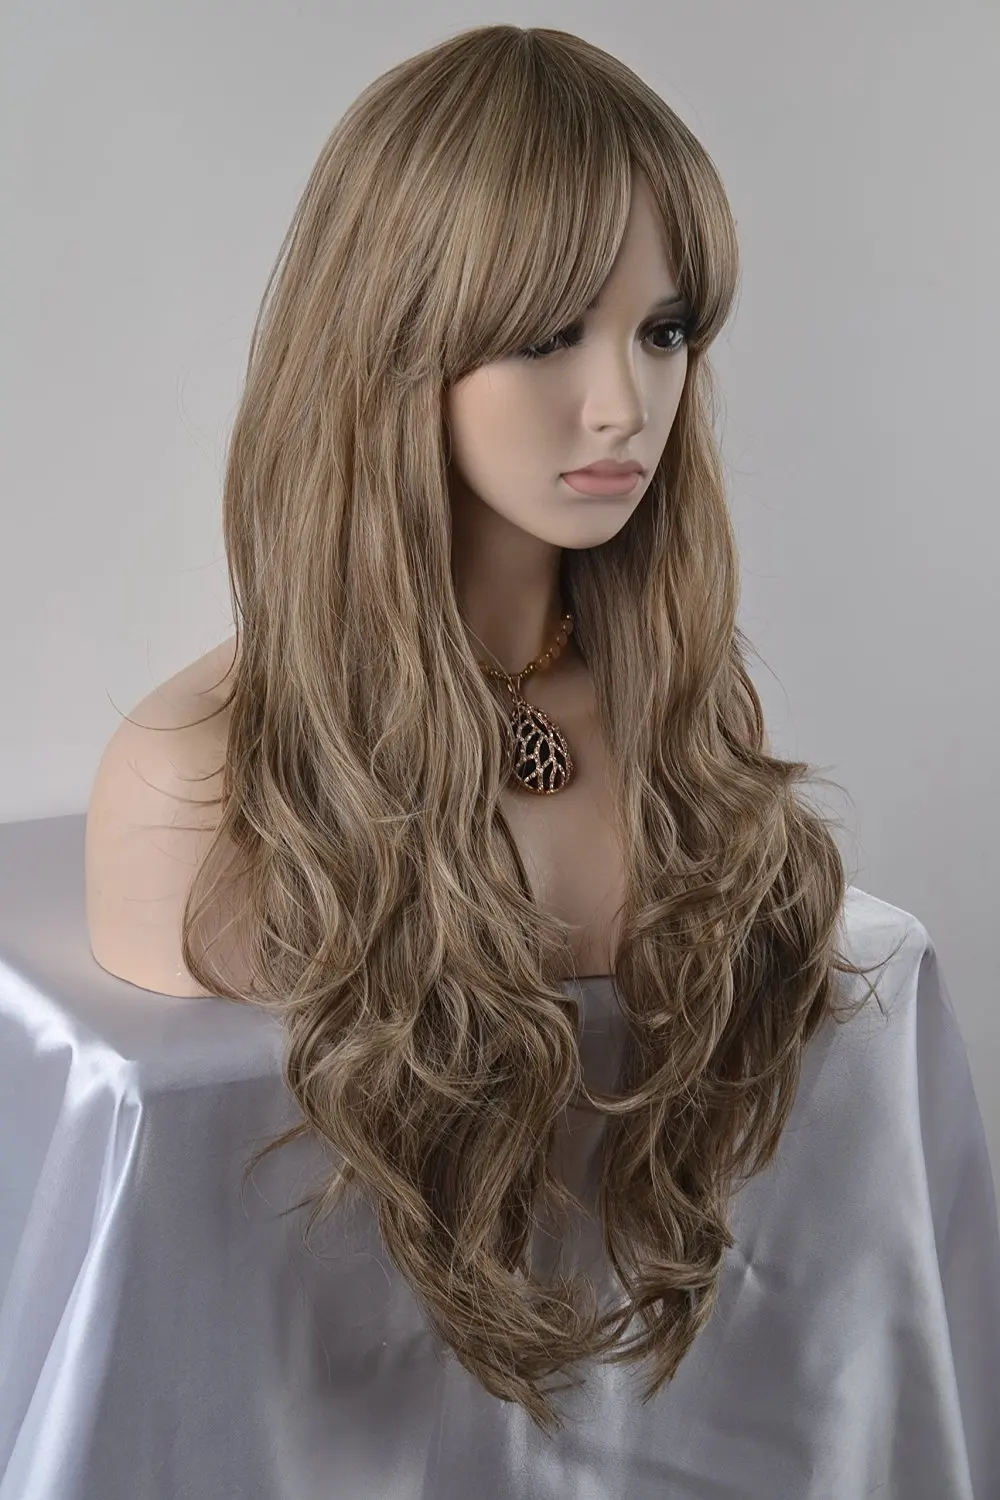 Cheap Realistic Blonde Wig Find Realistic Blonde Wig Deals On